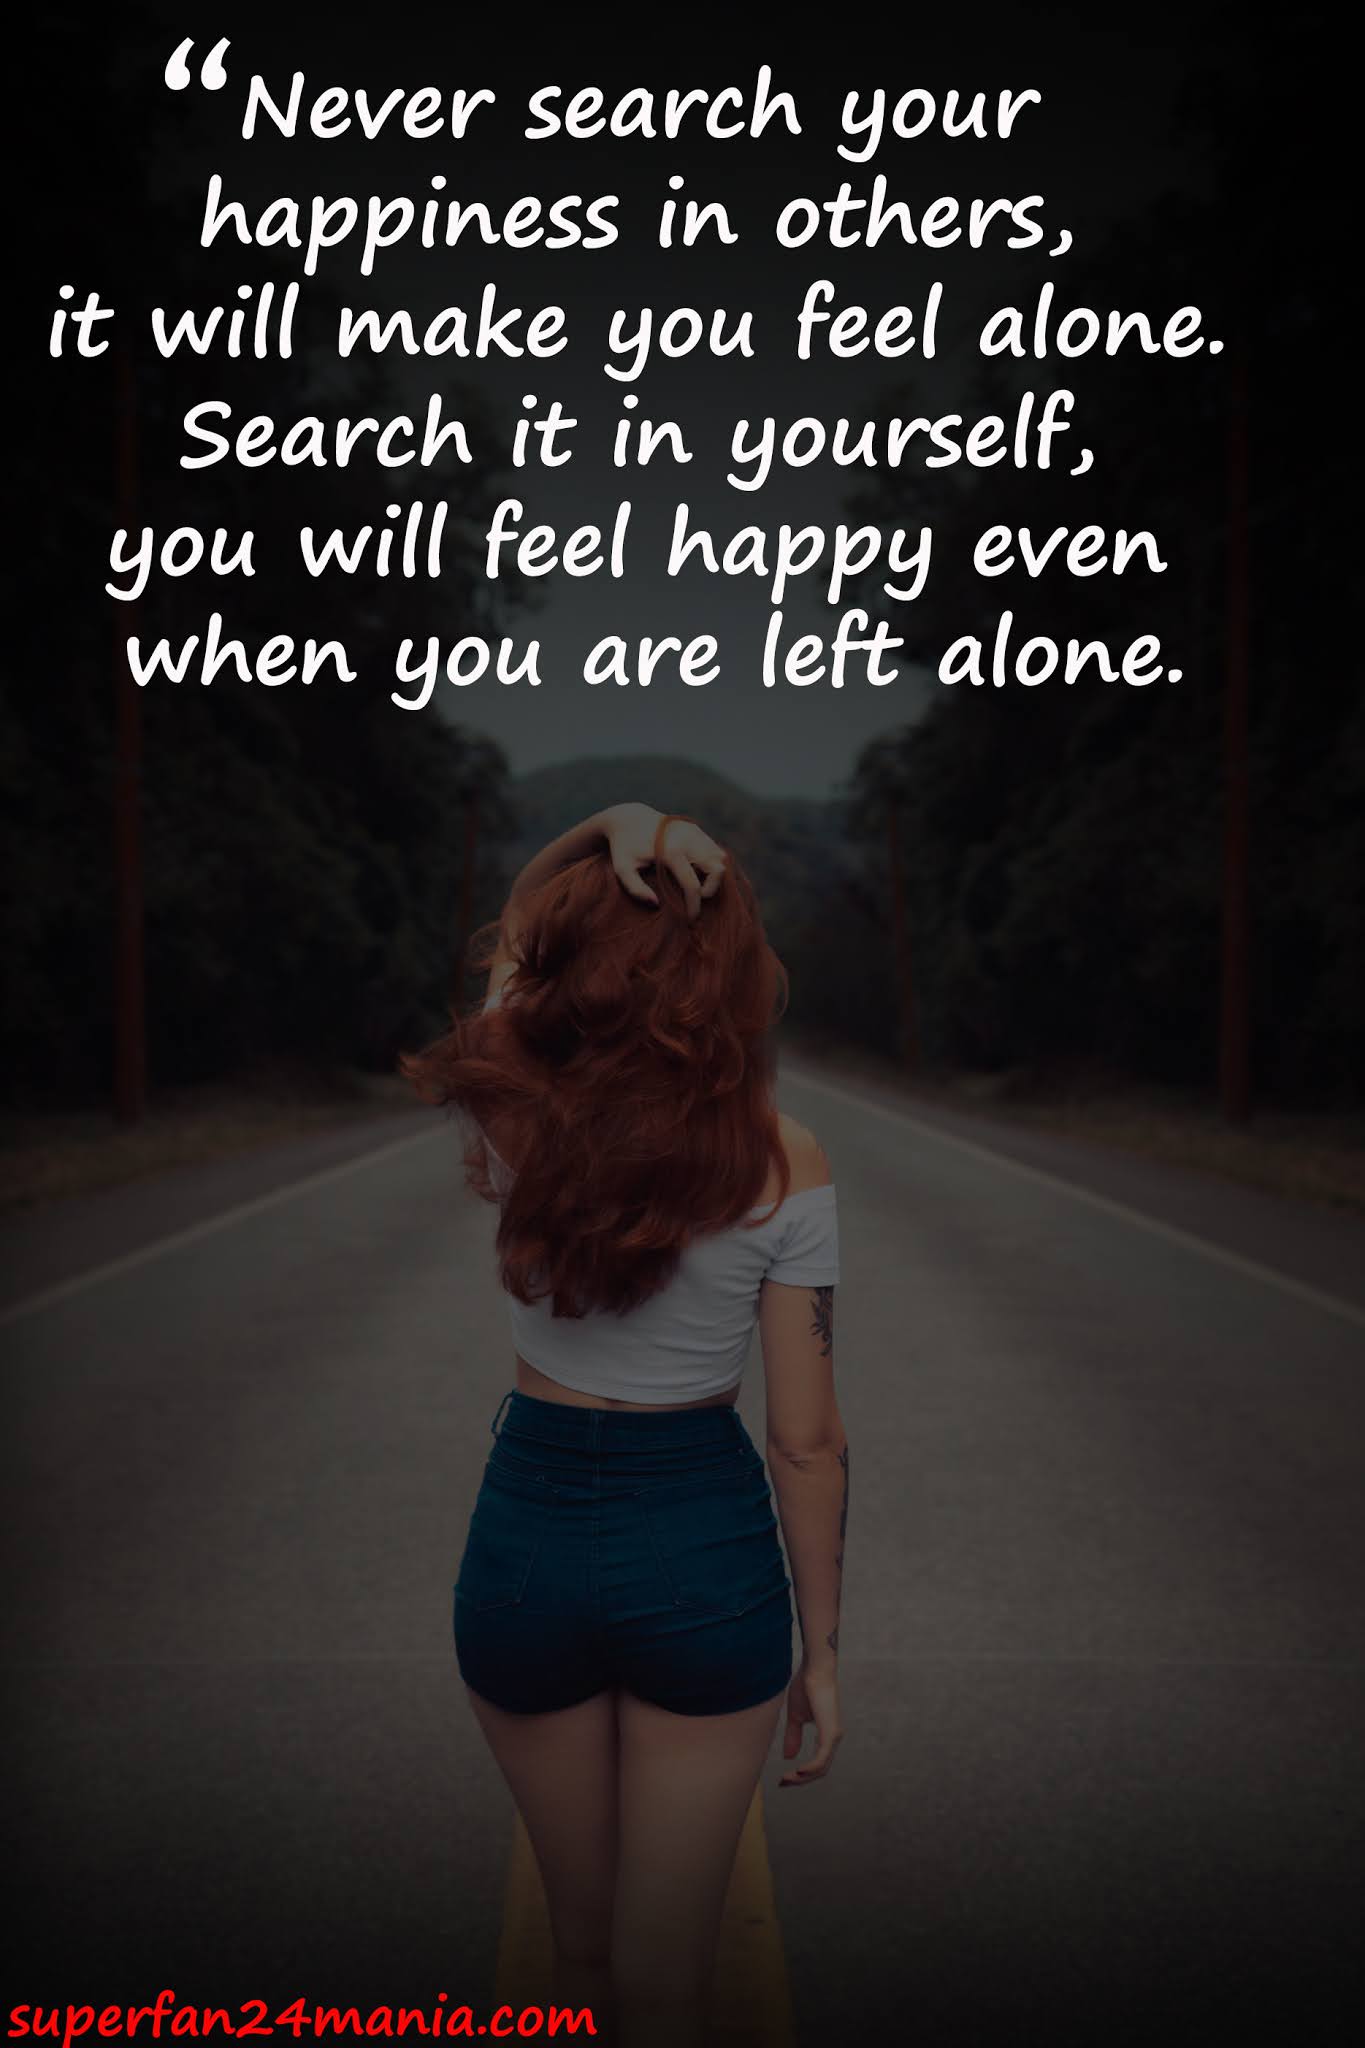 Best Lonely Girl Quotes Image Collections. Sad Girl Quotes Image. Loneliness Quotes Image